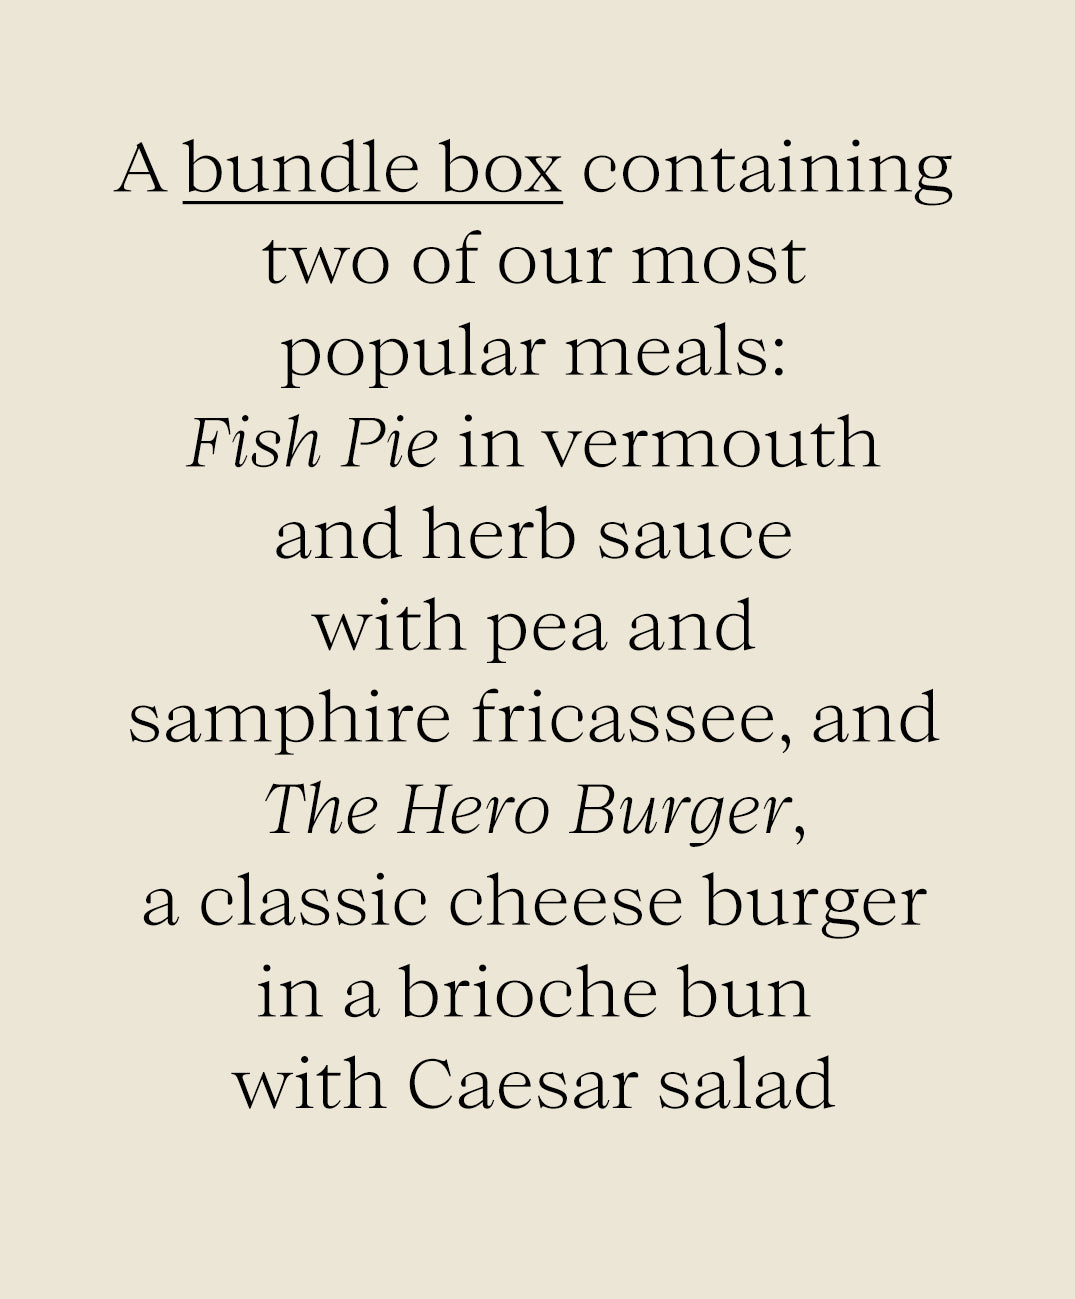 2 Meal Bundle Box - Fish Pie and The Hero Burger